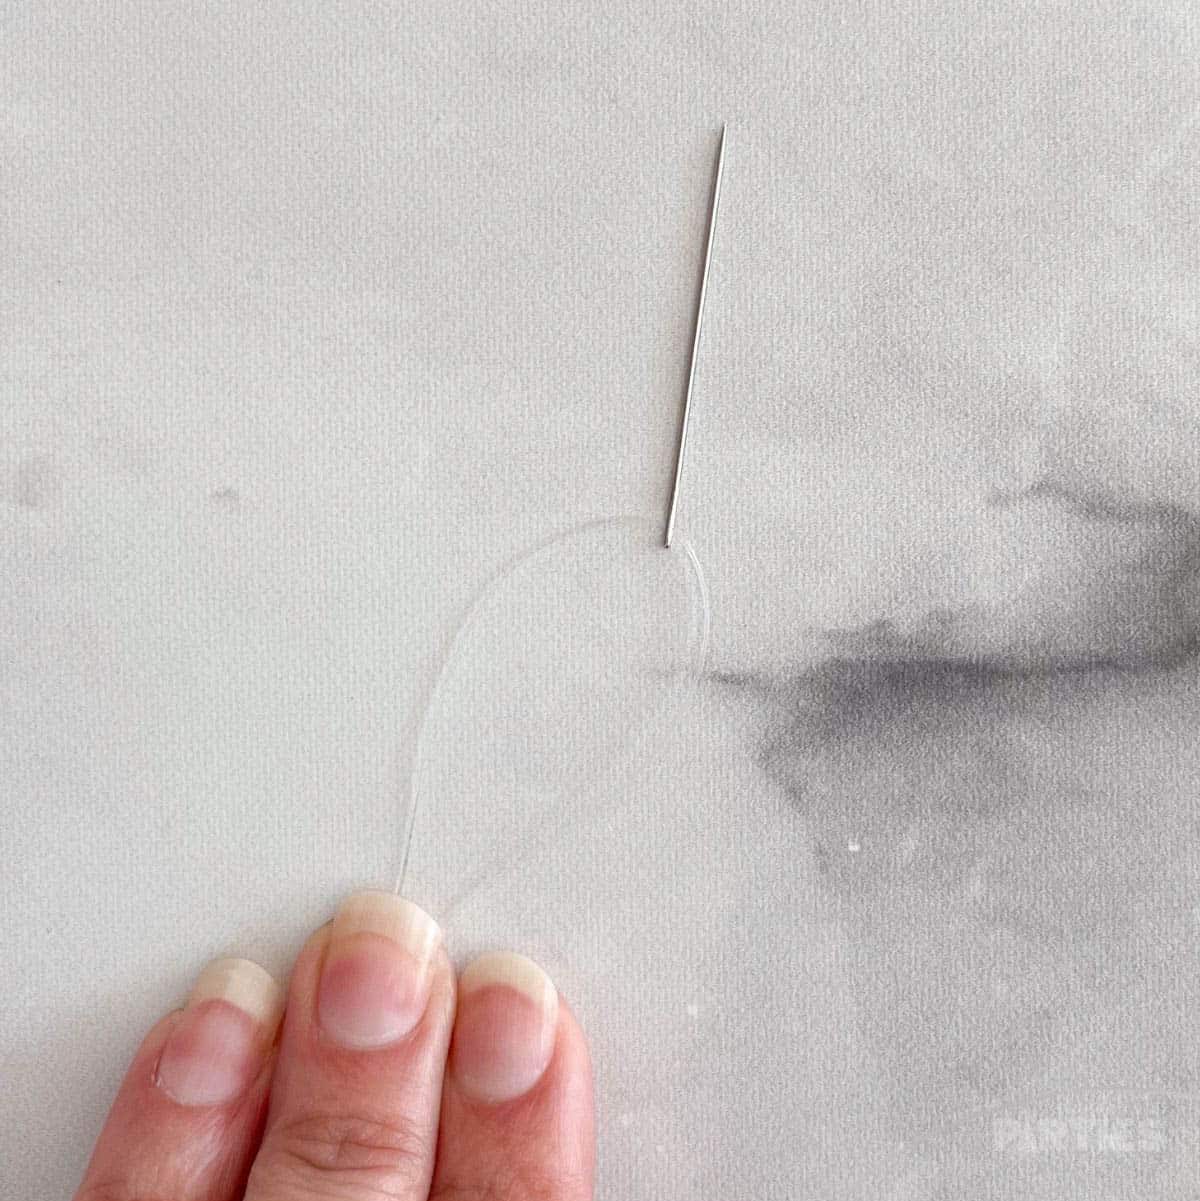 Monofilament threaded through a sewing needle.